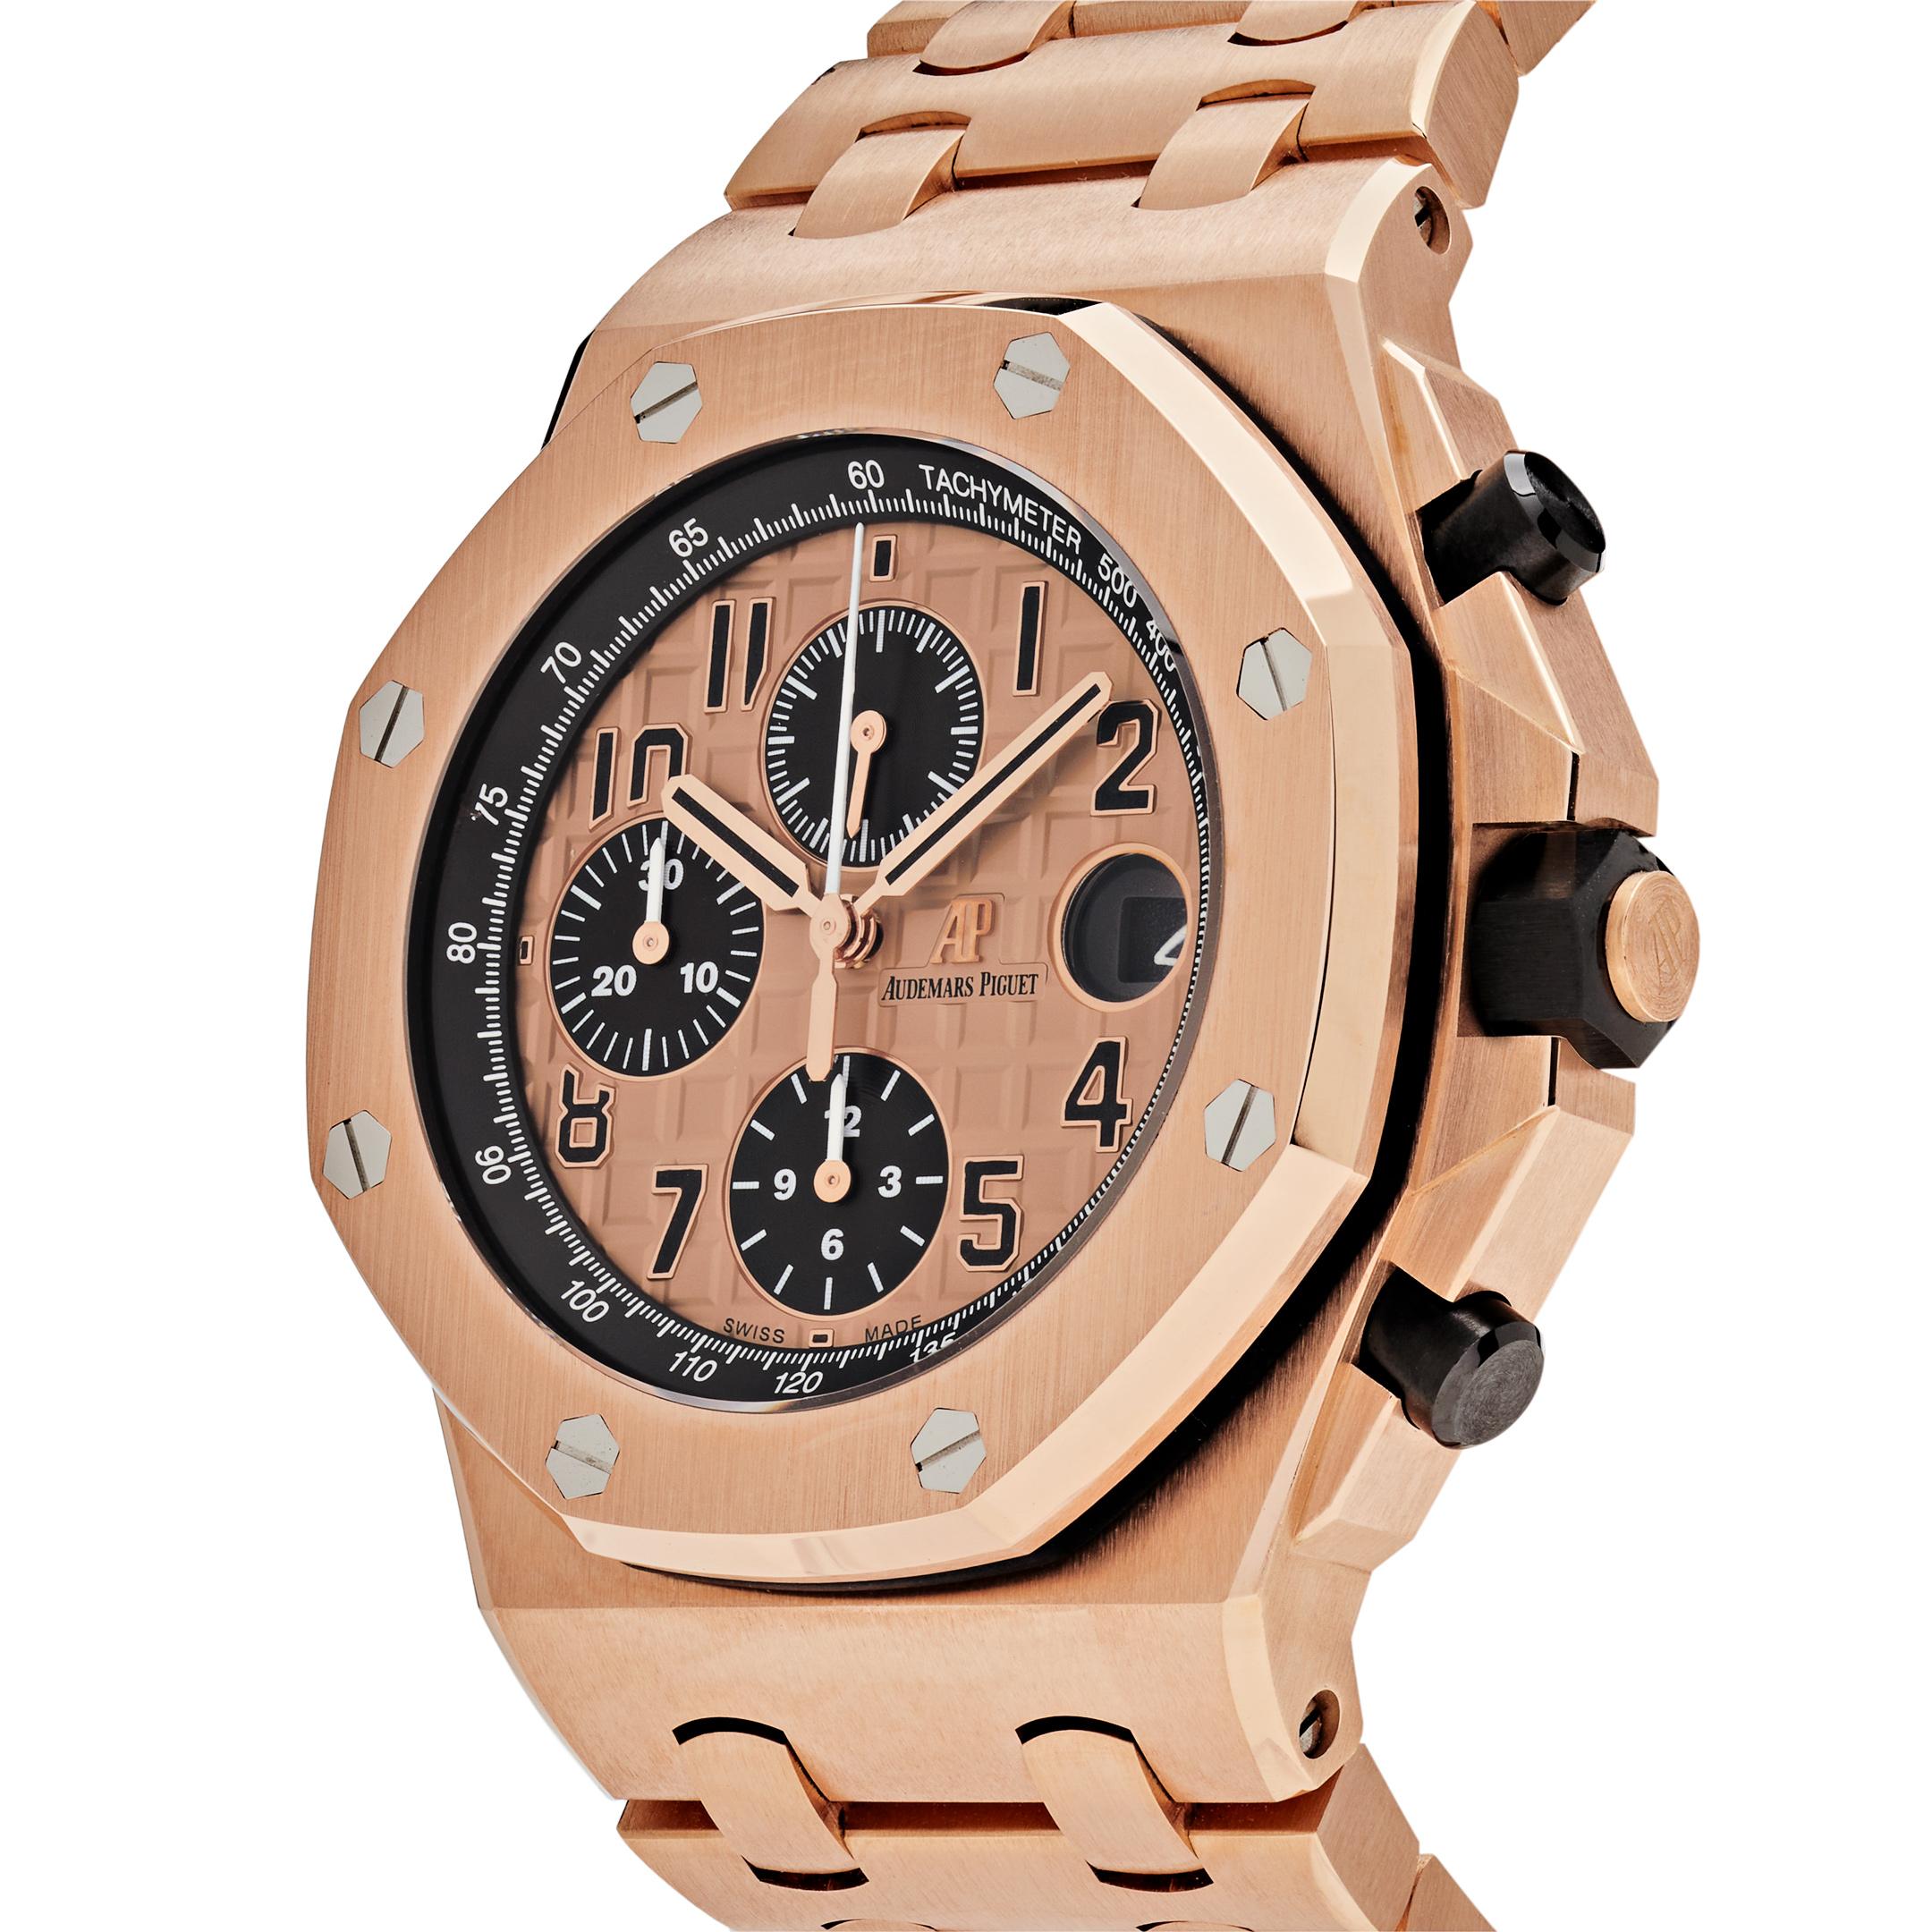 This Royal Oak Offshore is designed with a 42 mm 18-carat rose gold case and bezel with black ceramic pushpieces and screw-locked crown. In the center inlays a stunning rose gold “Méga Tapisserie” dial with Arabic numerals featuring black counters